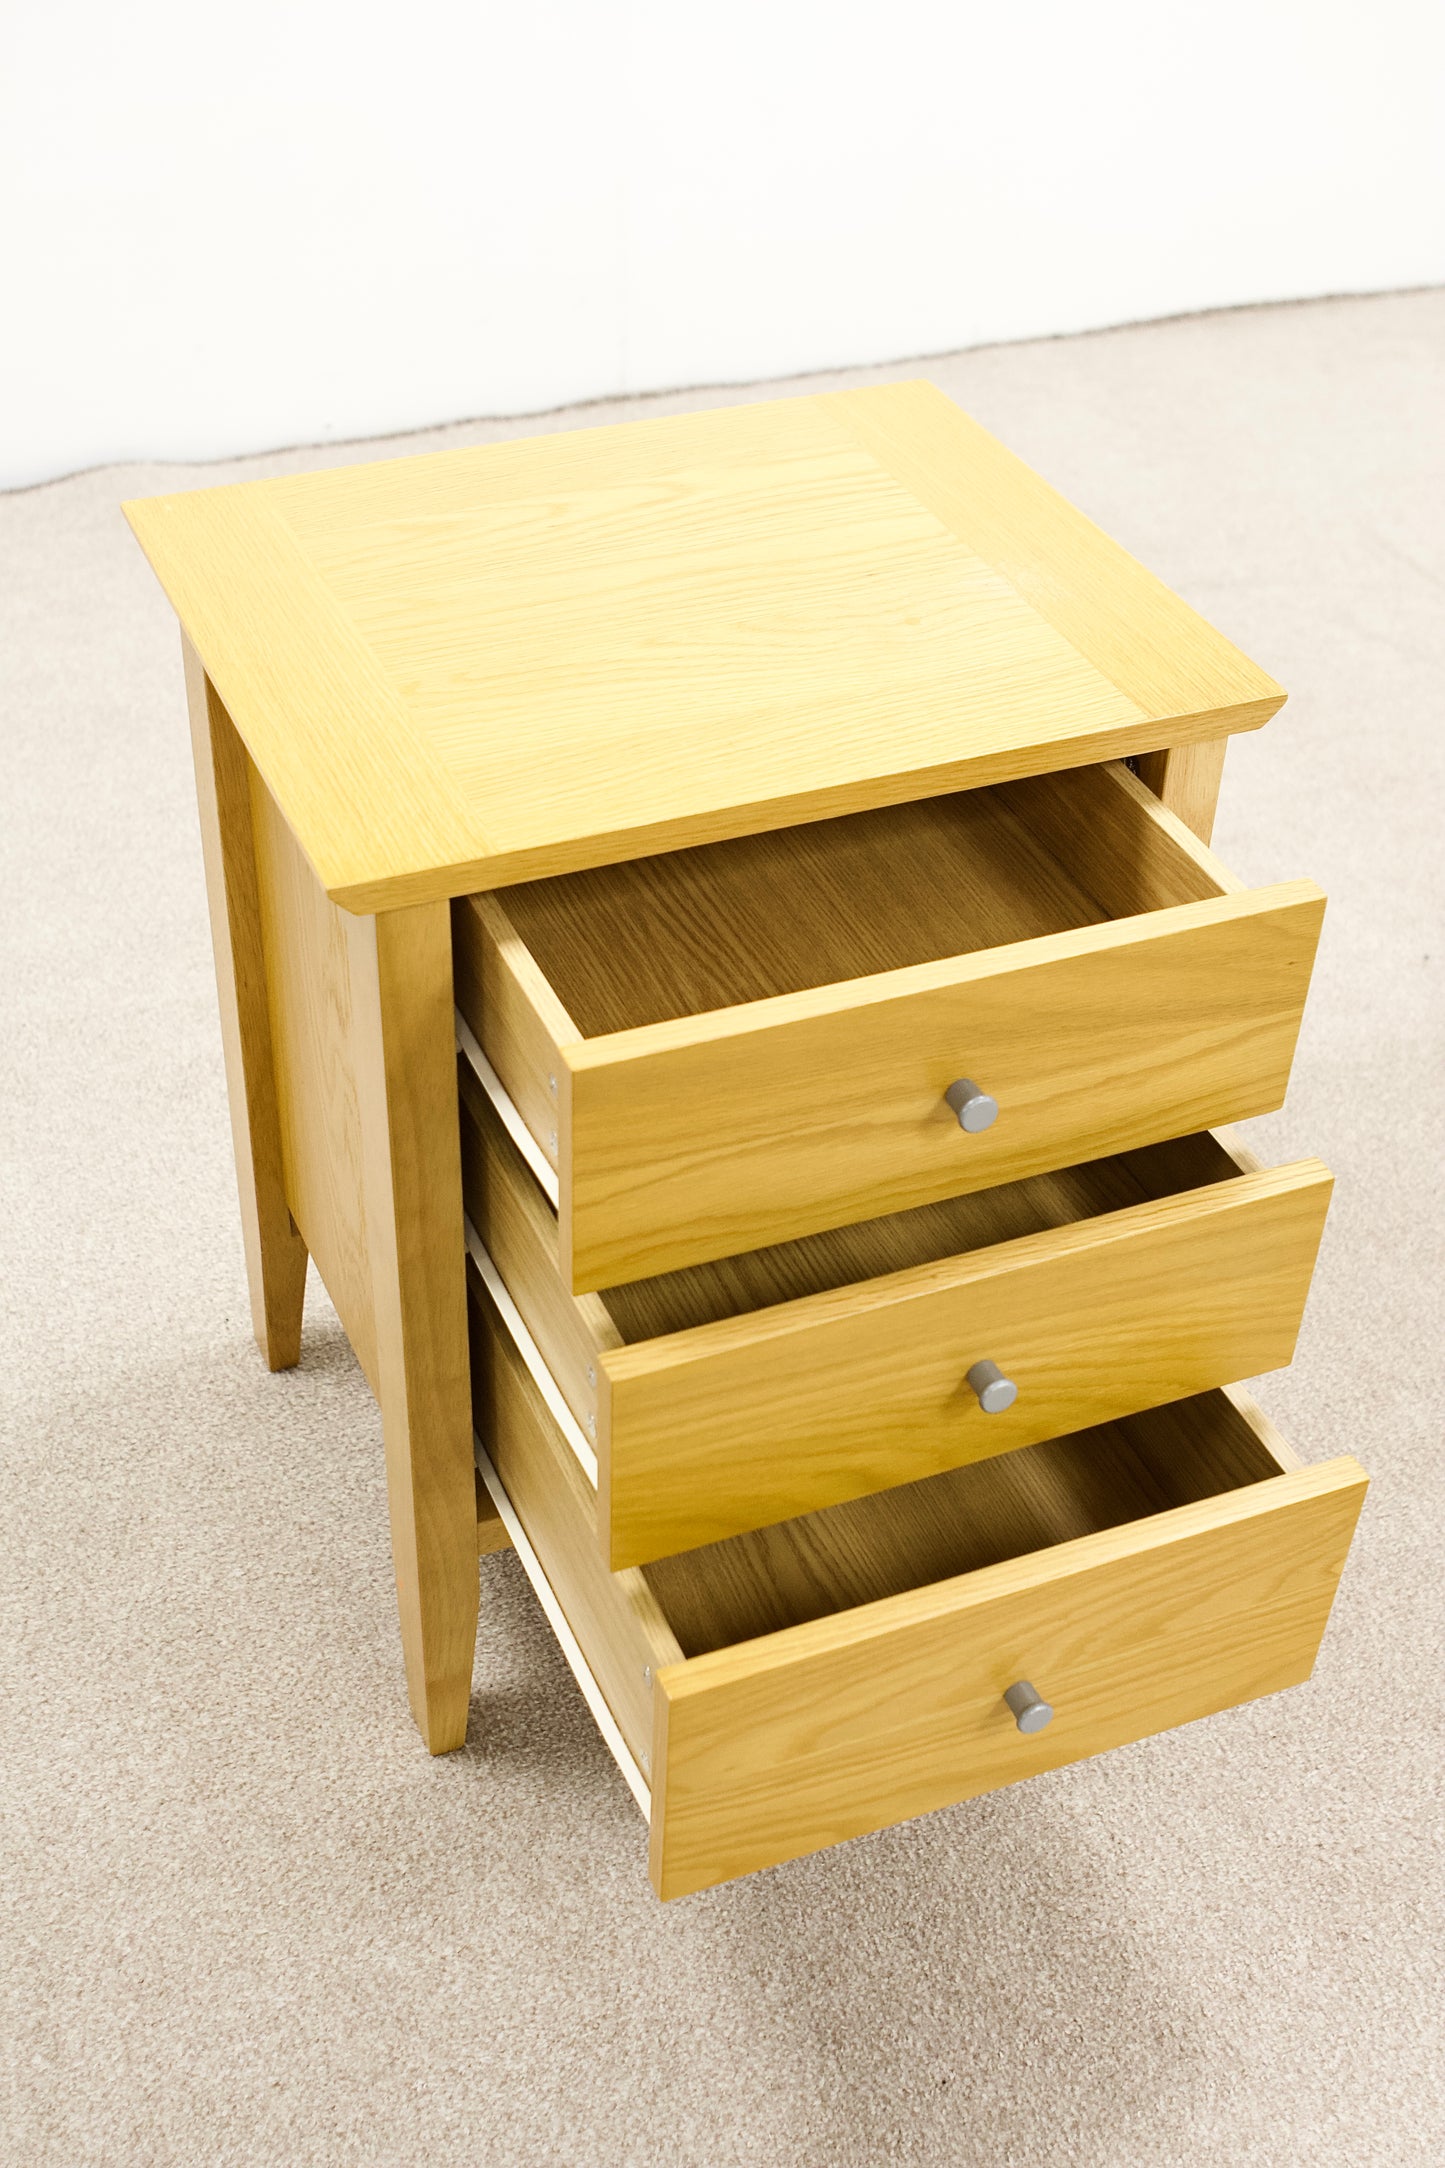 Matching Bedside Cabinets